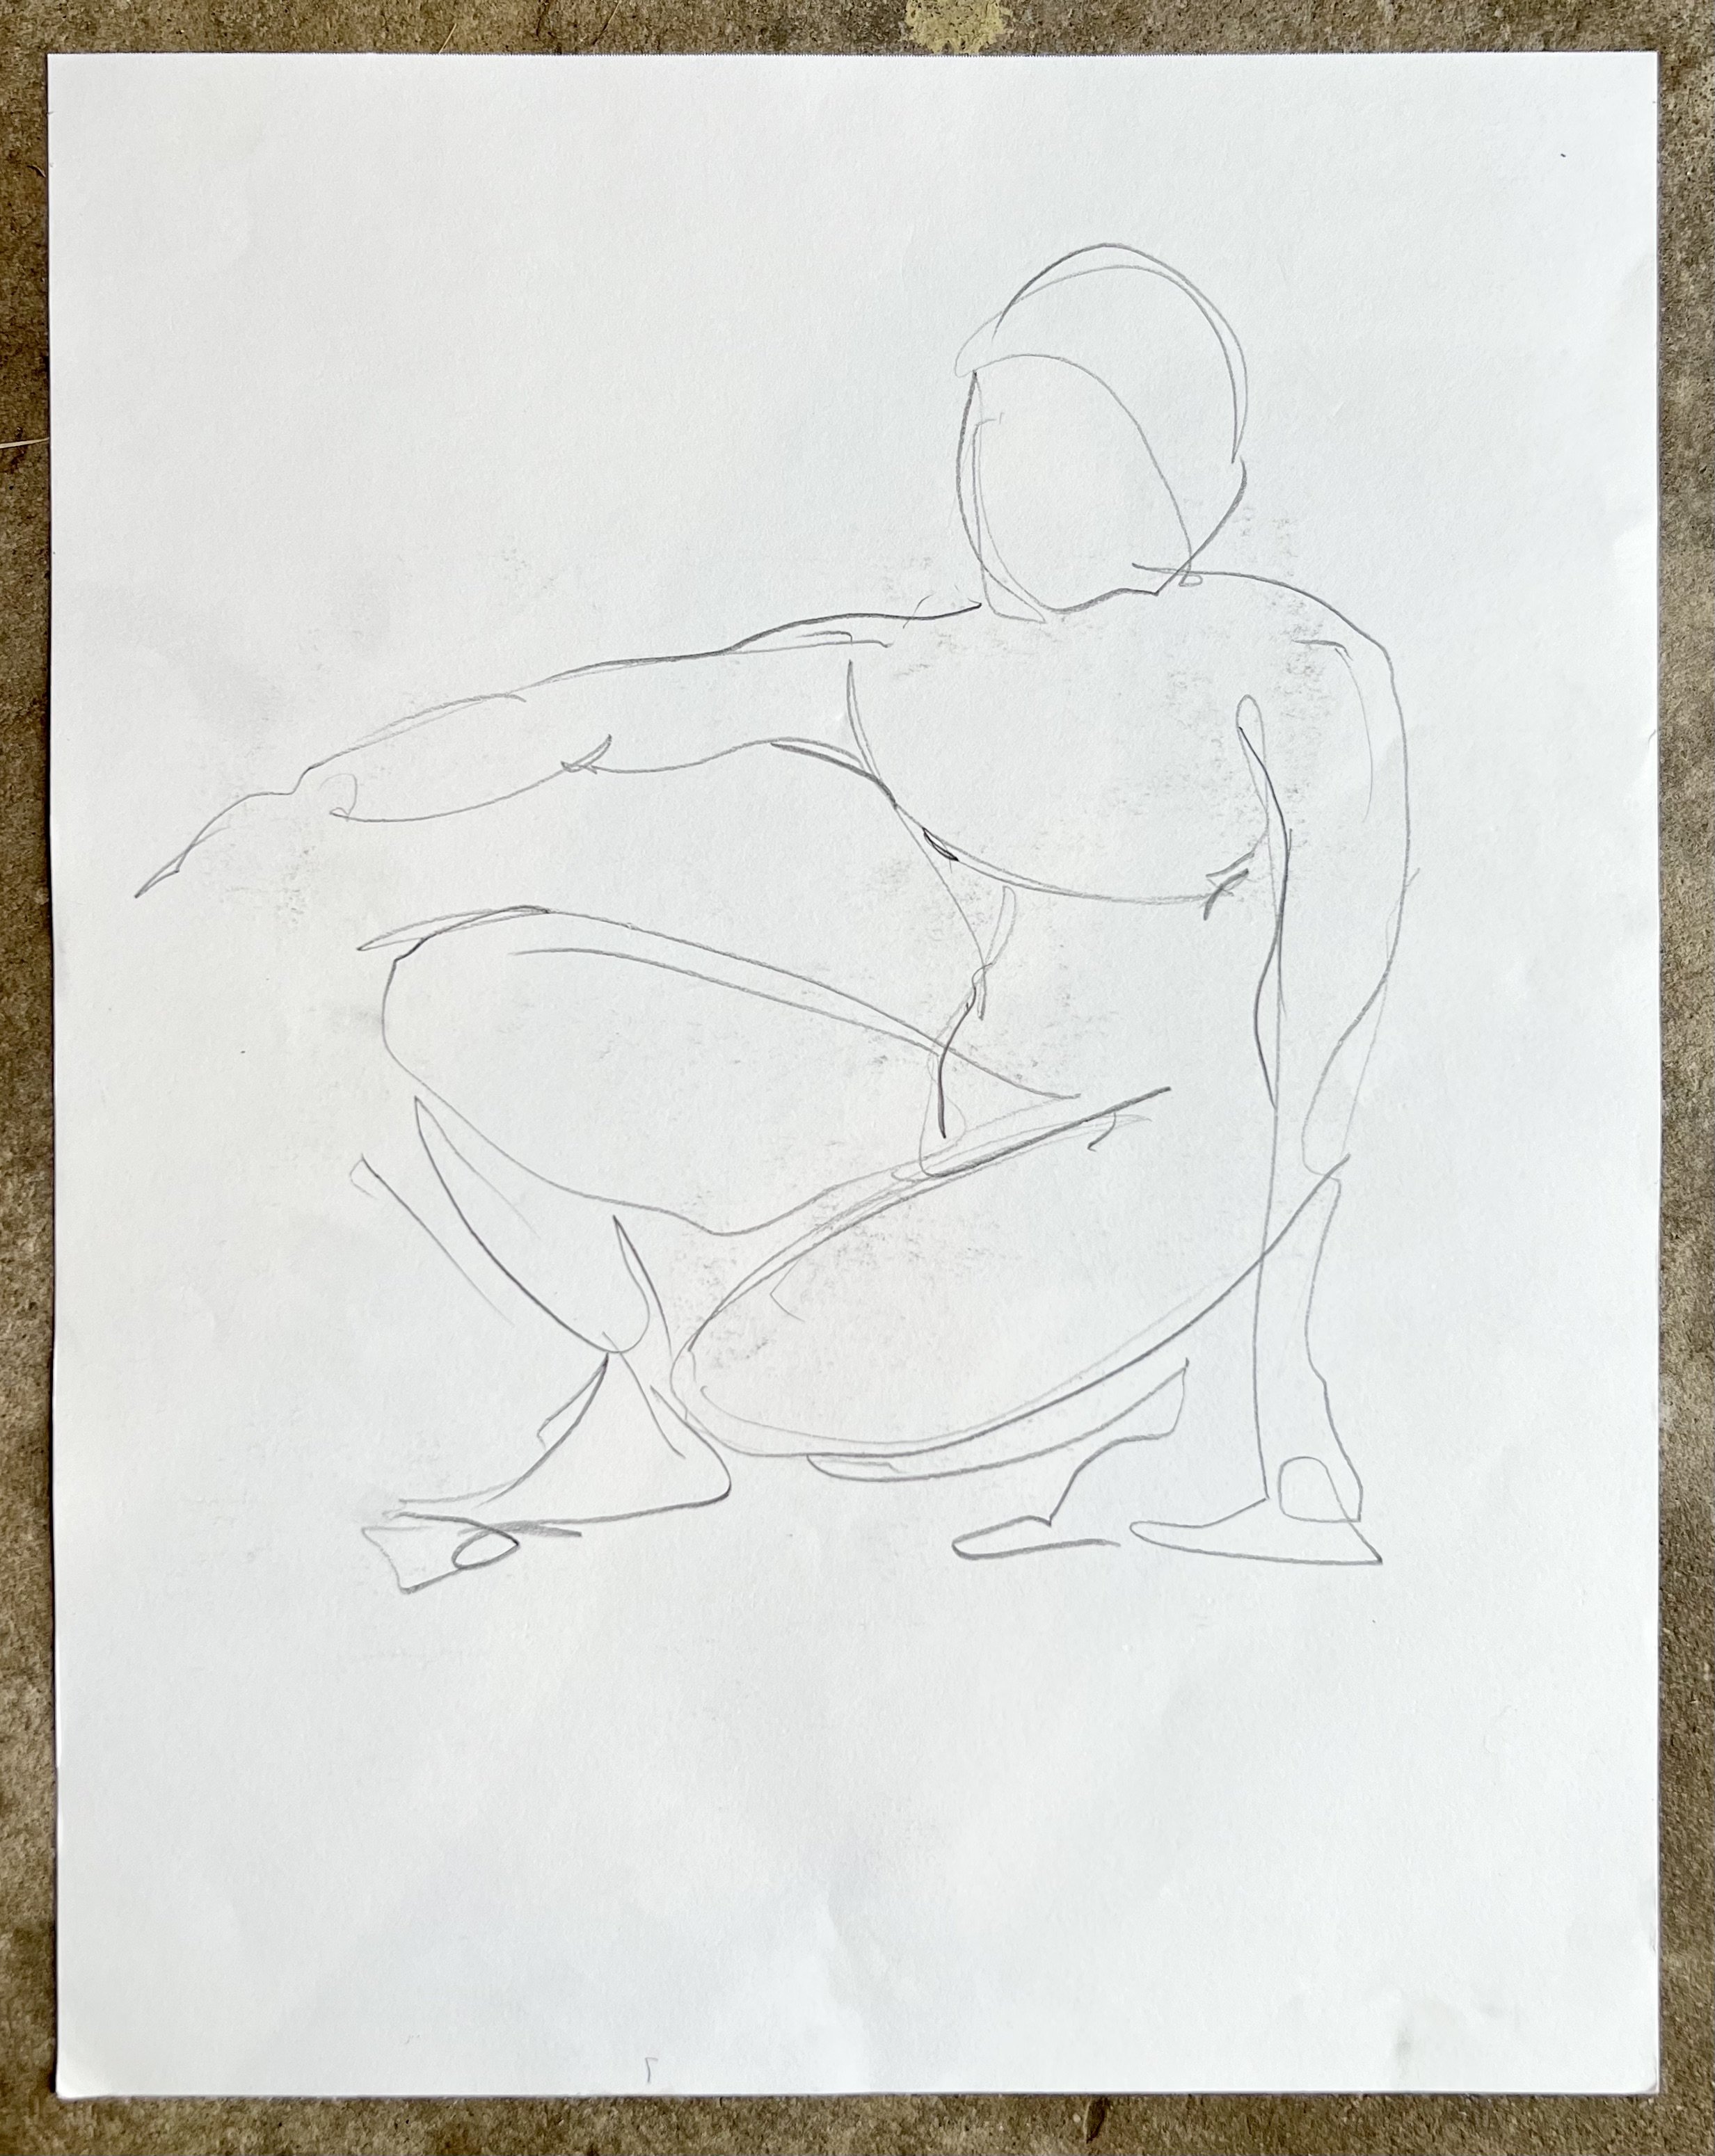 Squatting gesture (reverse of Double gesture study)